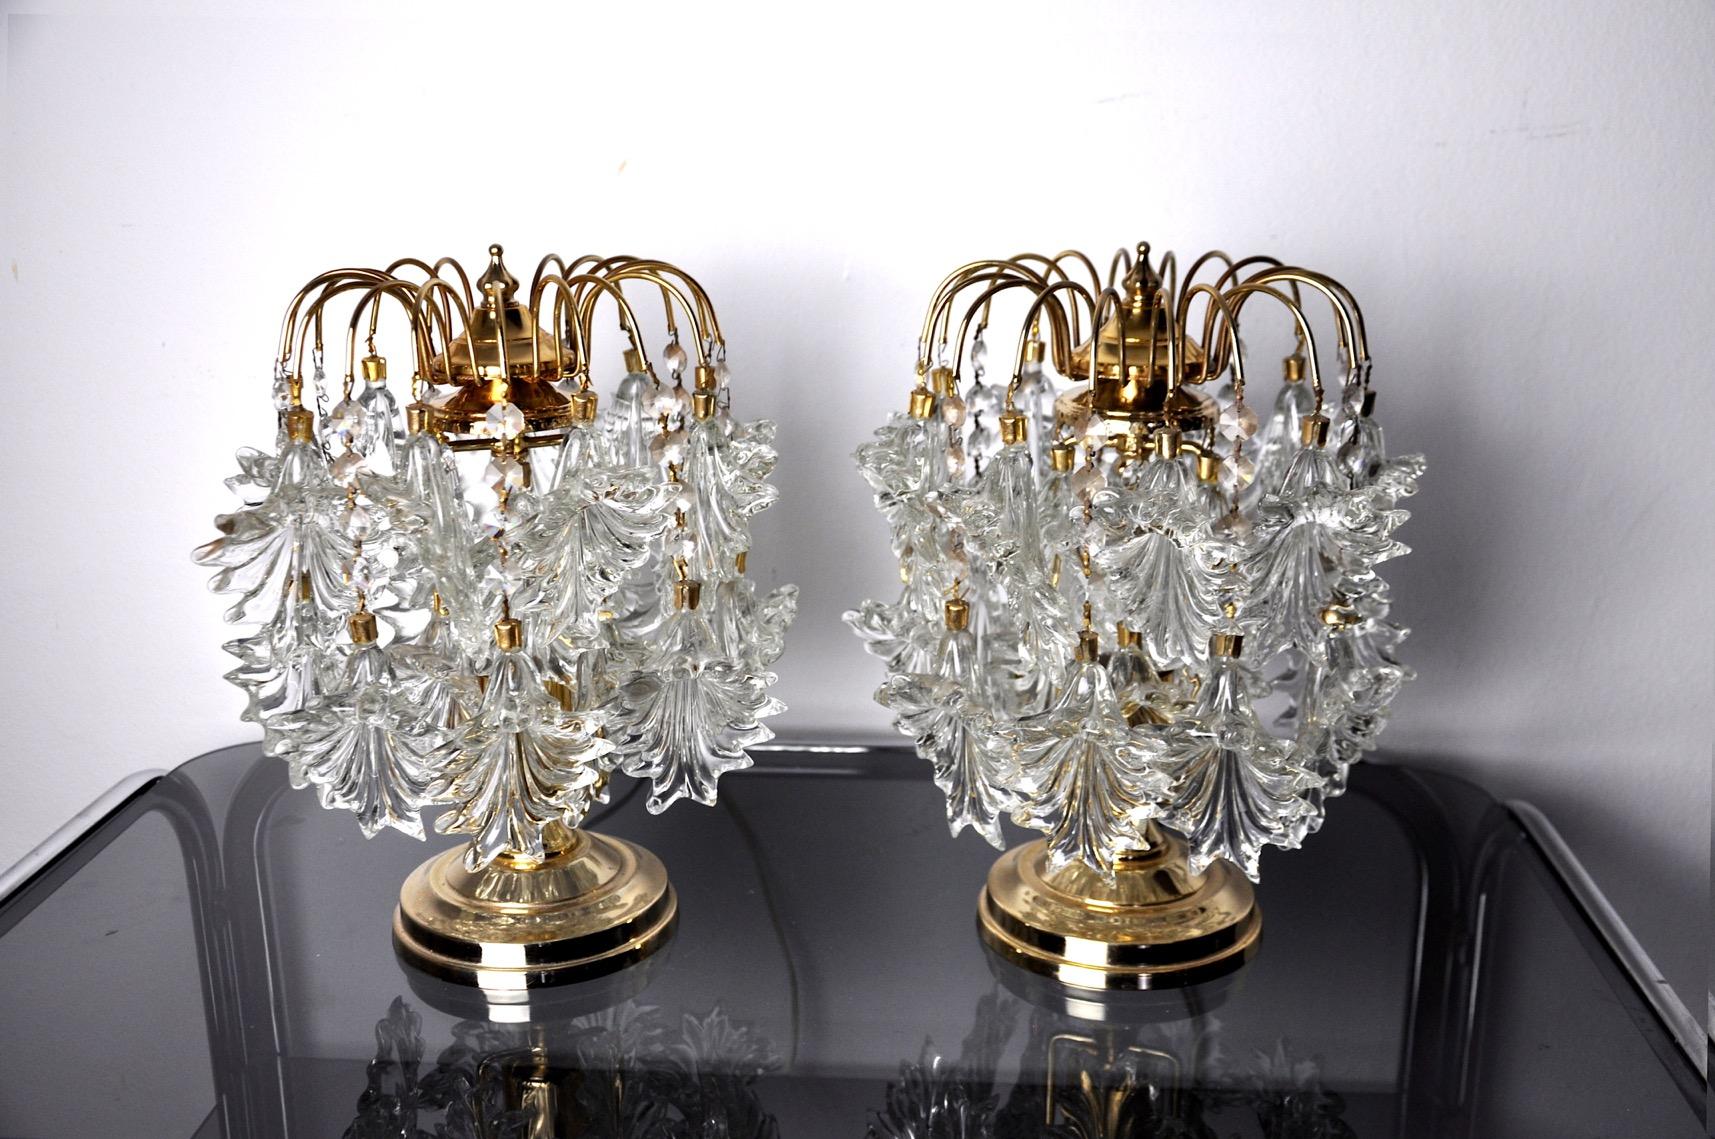 Very nice pair of kinkeldey lamps designed and produced in Germany in the 1970s. Cut crystals spread over a golden metal structure. Very beautiful design objects that will illuminate your interior wonderfully. Electricity checked, marks of time